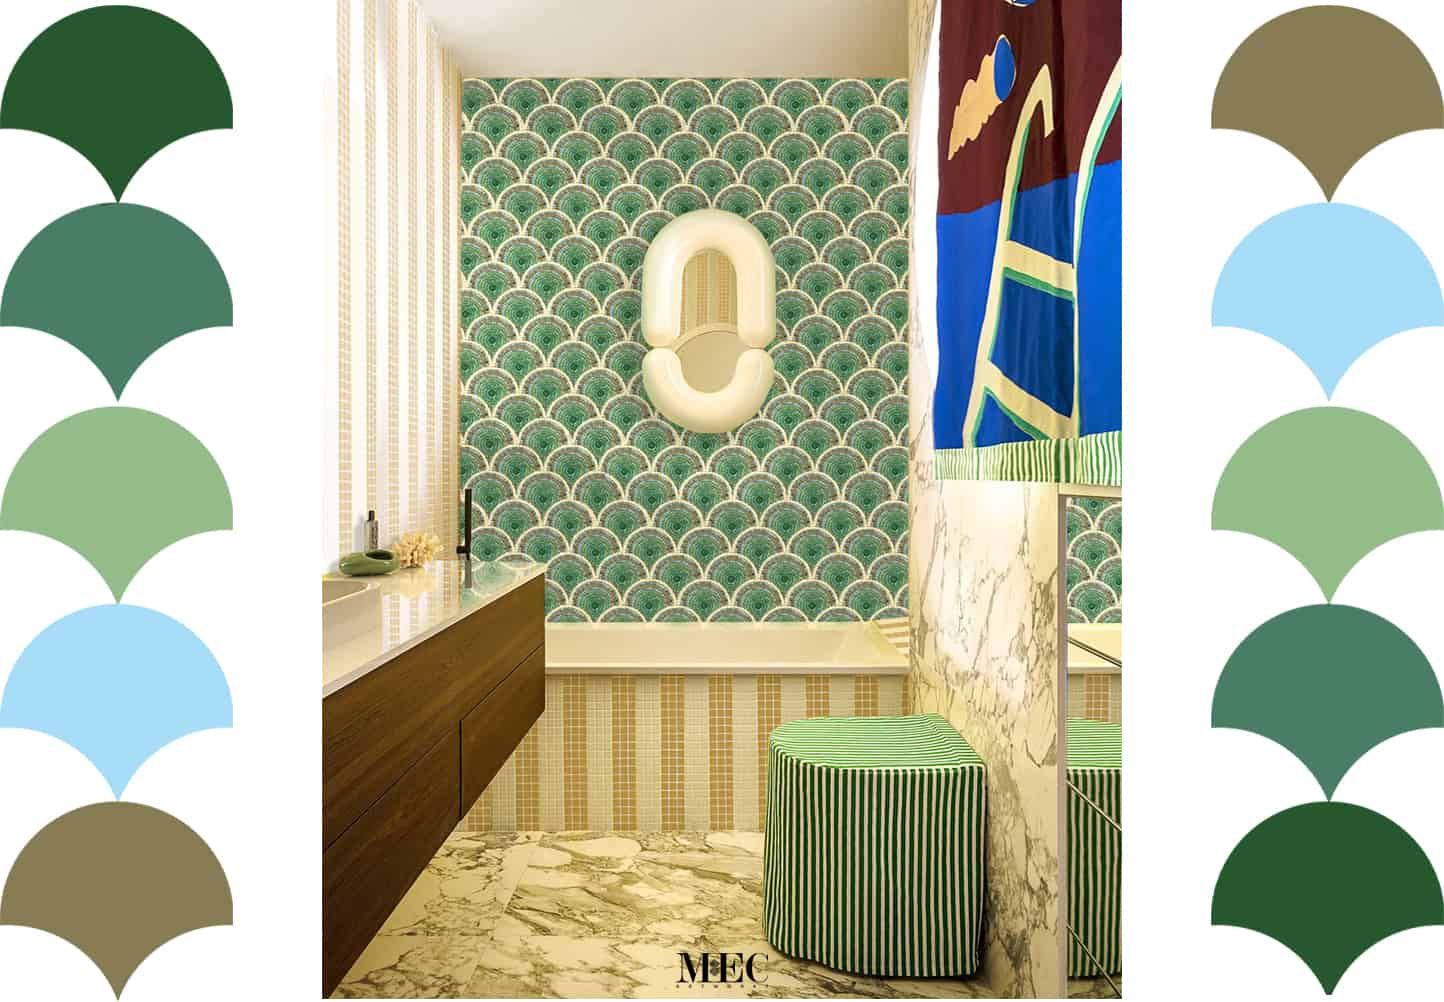 A bathroom with a colorful mosaic wall of green, blue, and white scalloped tiles. A modern mirror, sink, and dark wood cabinet are below the mosaic wall. The image also includes abstract designs of curtains and scalloped patterns on the sides.